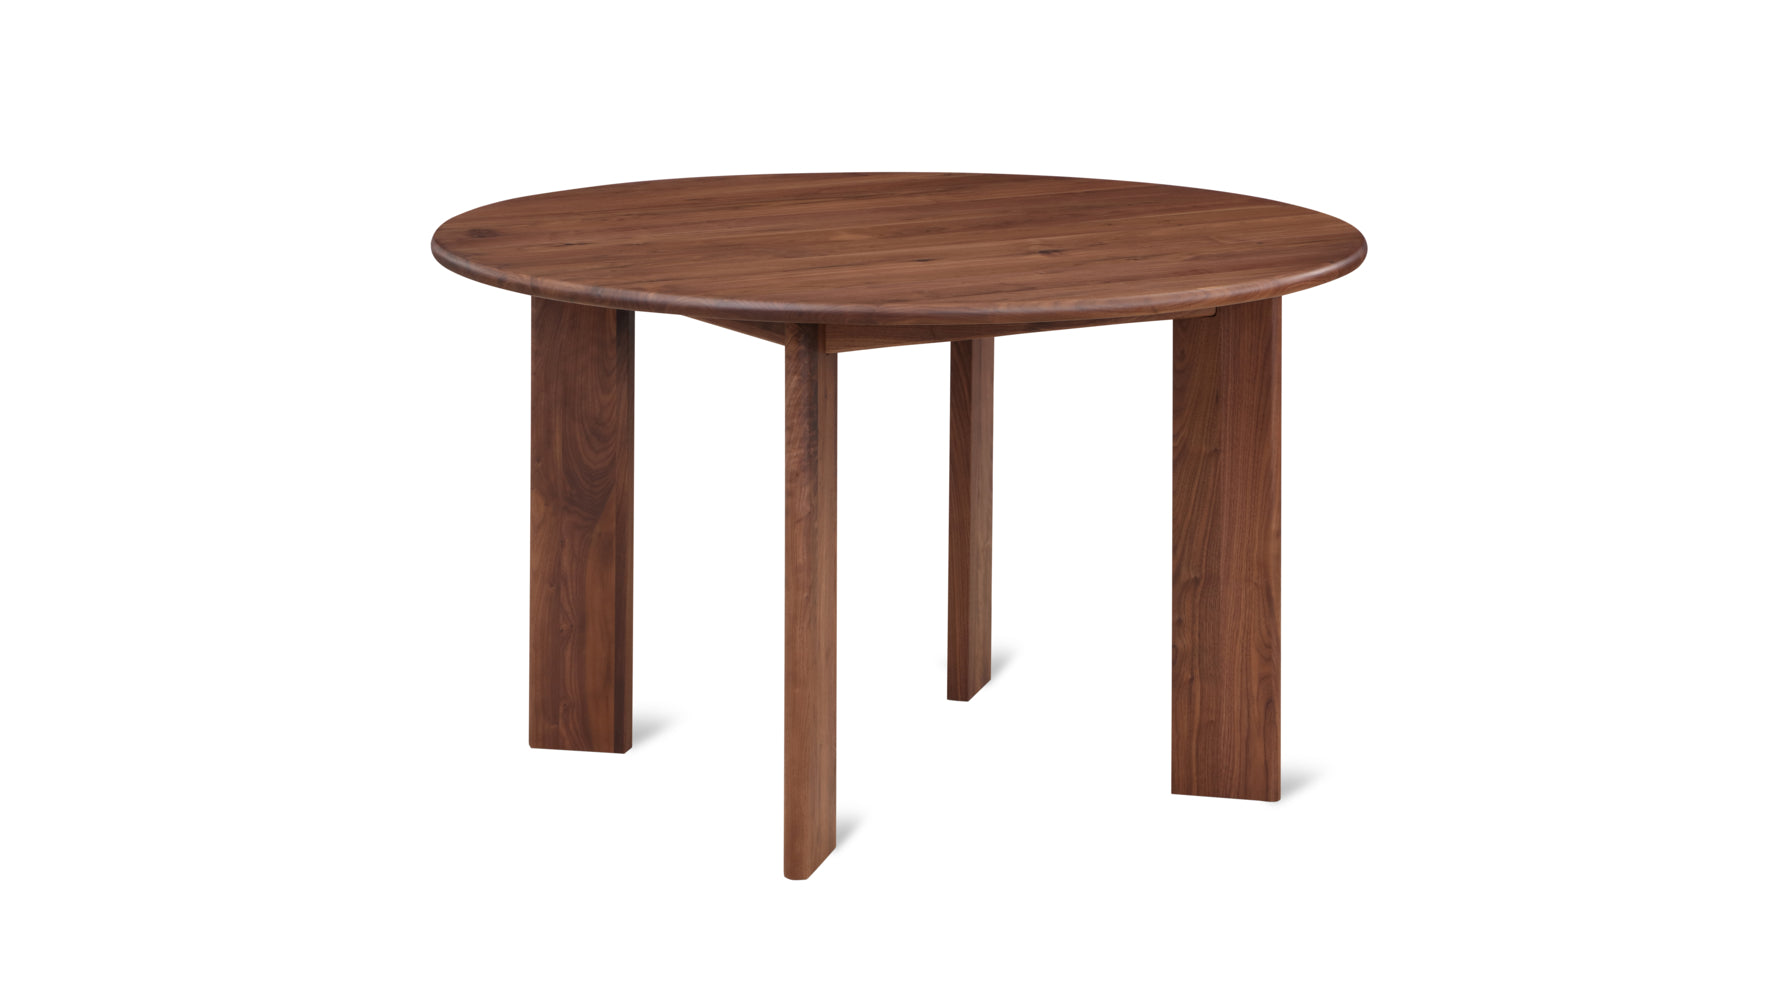 Frame Round Dining Table, Seats 4-5 People, American Walnut - Image 1